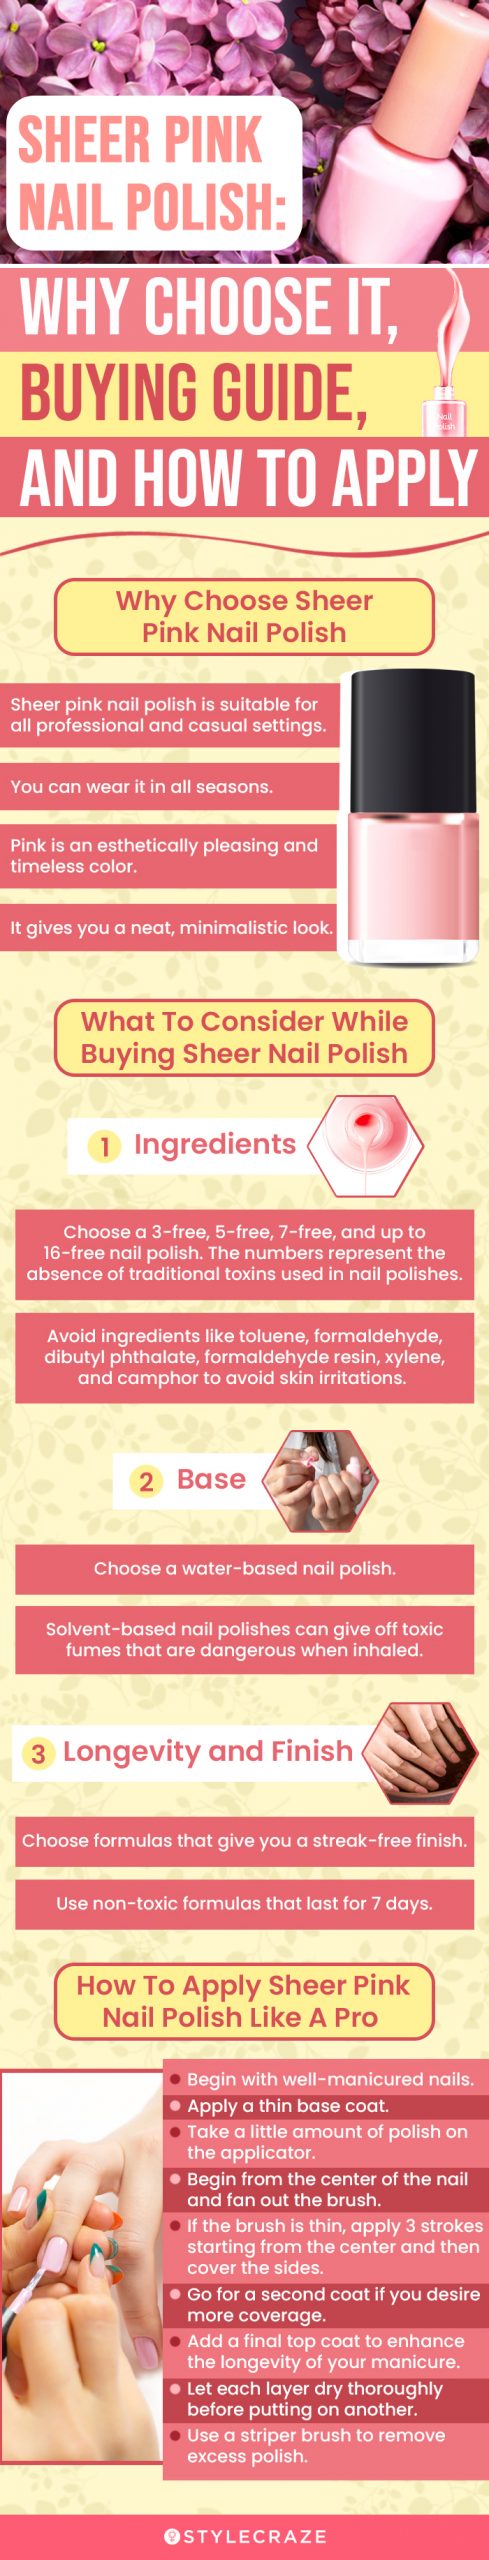 Sheer Pink Nail Polish: Why Choose It, Buying Guide, And How To Apply [infographic]